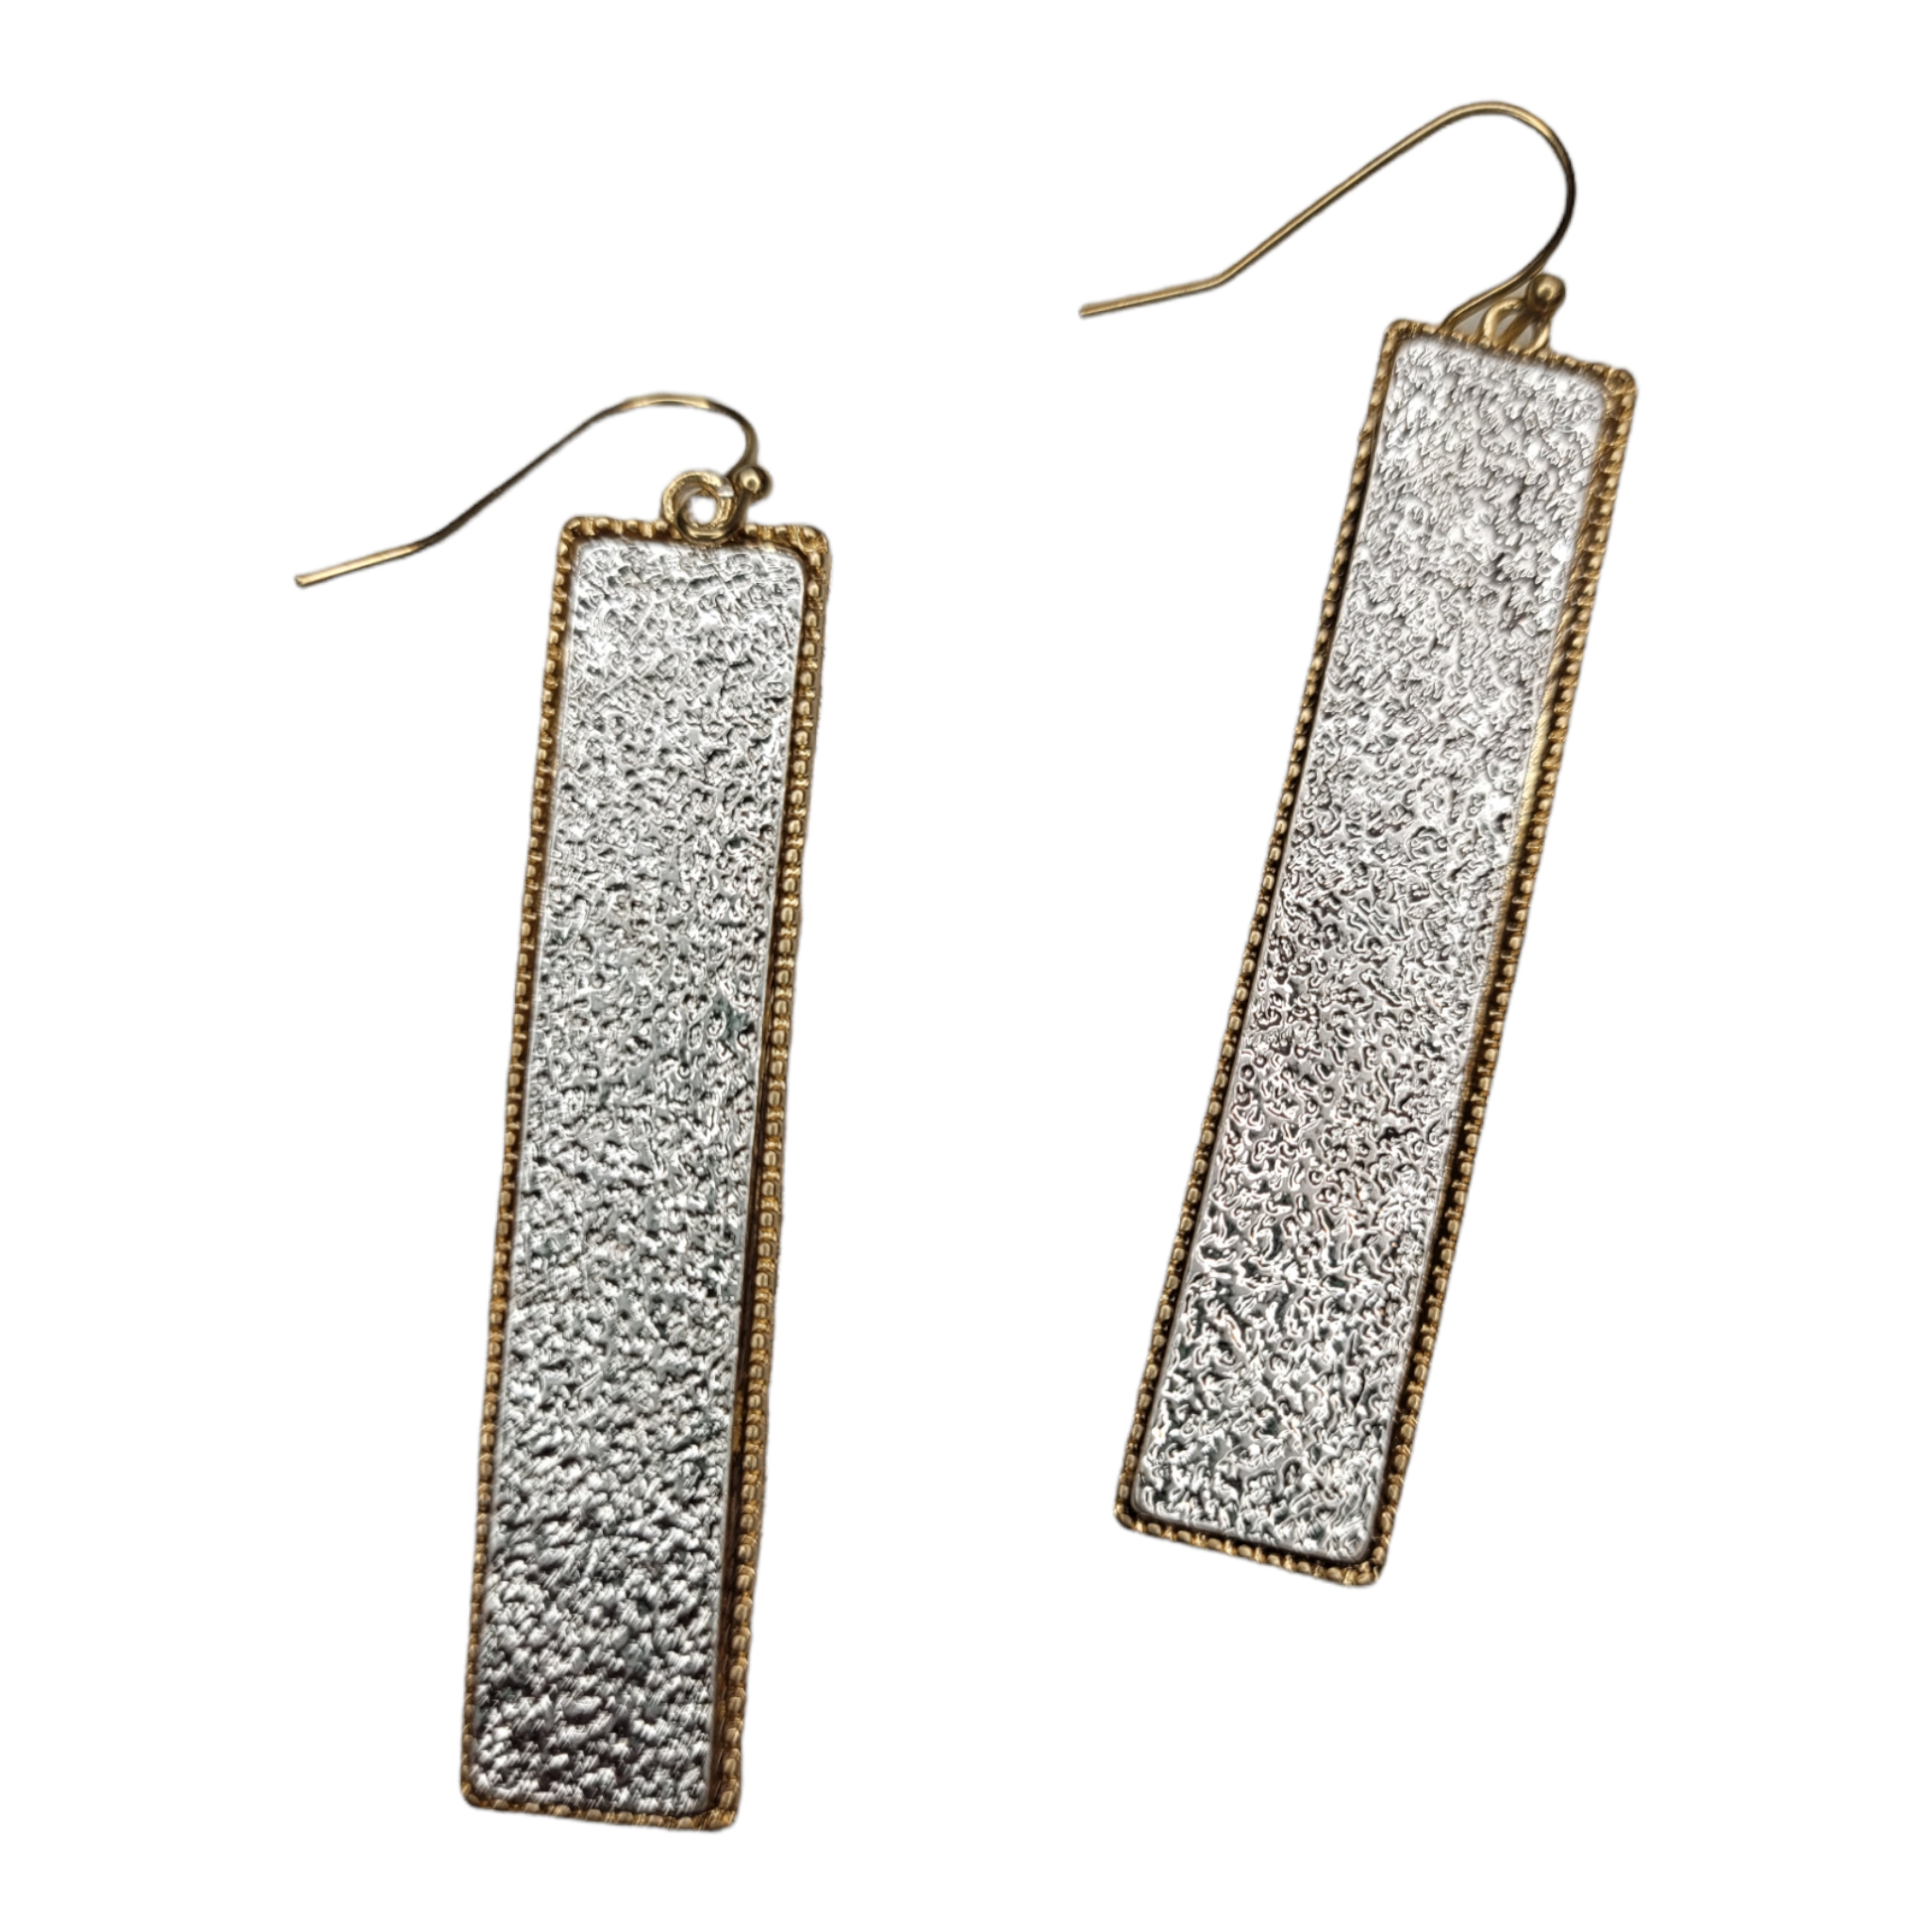 Silver & Gold Rectangle Earrings-Earrings-louisgeorgeboutique-LouisGeorge Boutique, Women’s Fashion Boutique Located in Trussville, Alabama